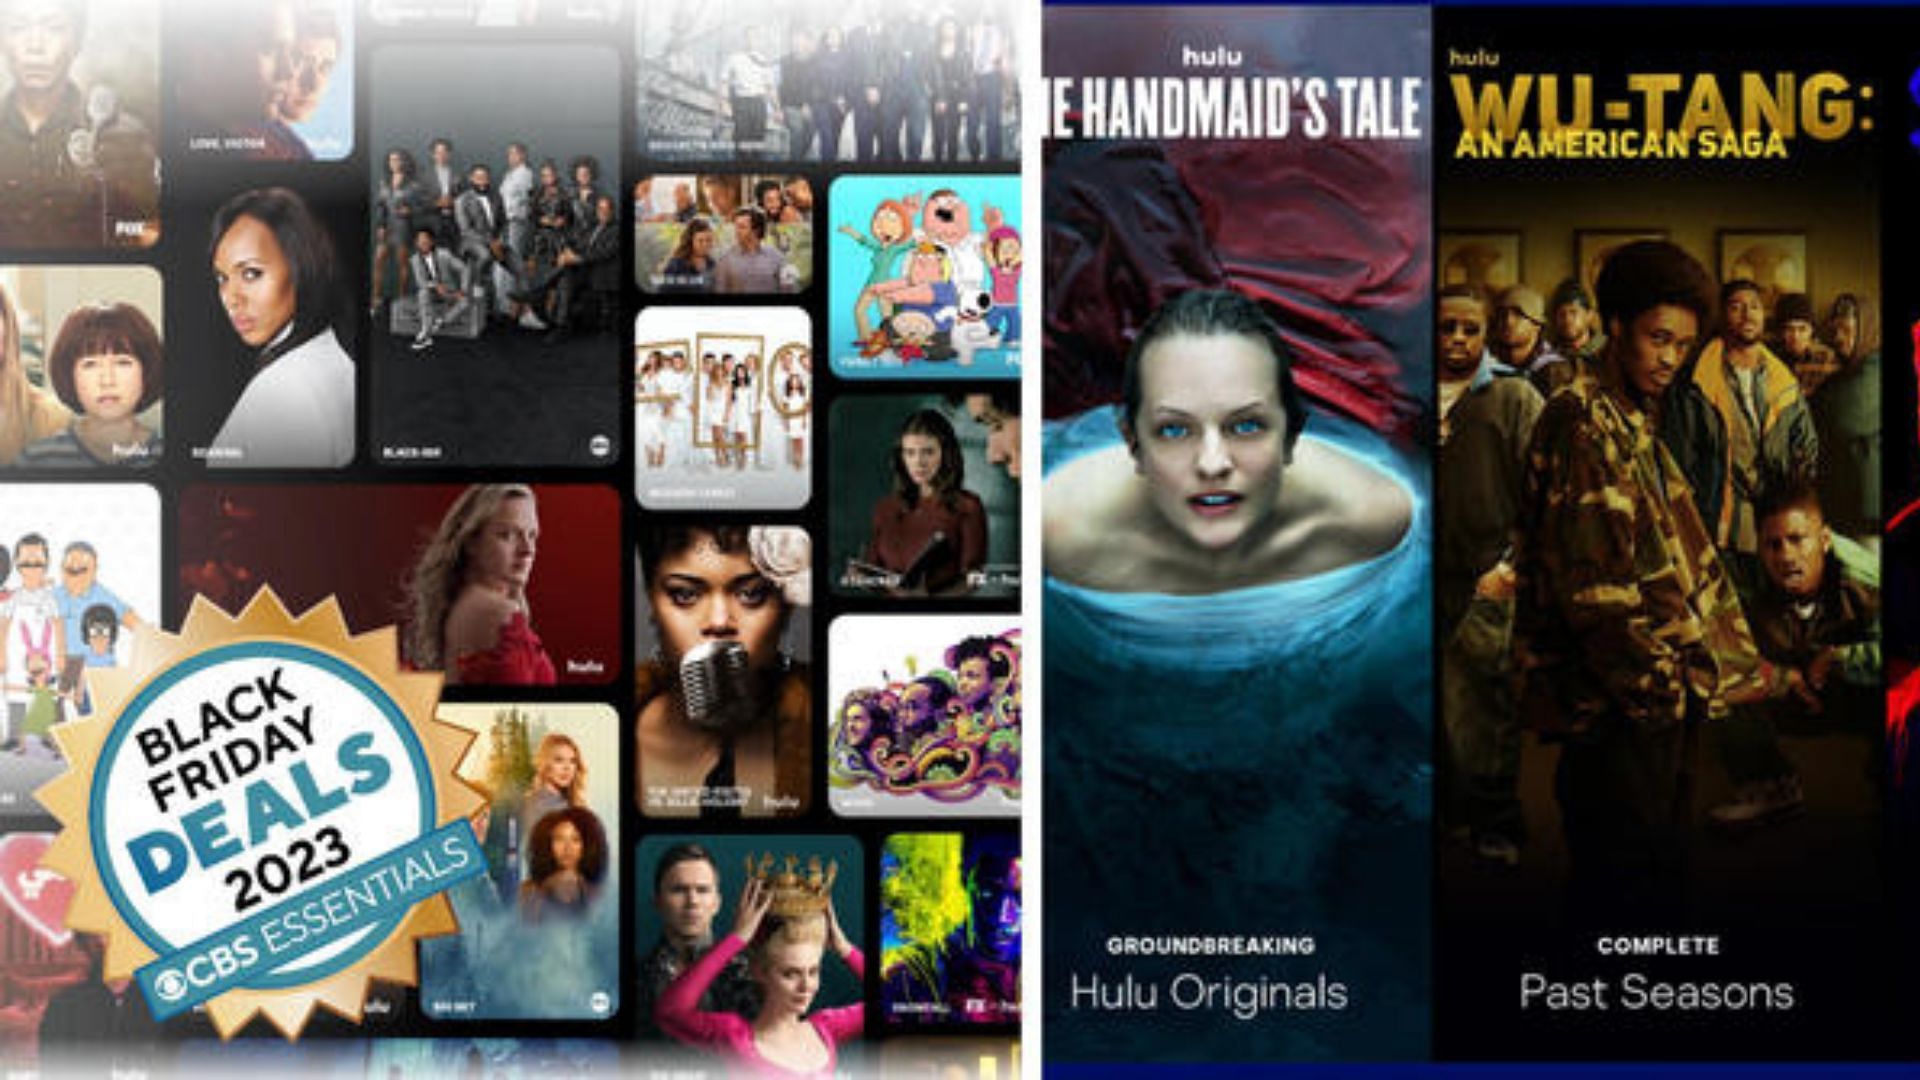 Is the Hulu Black Friday deal of 99 cents a month subscription real